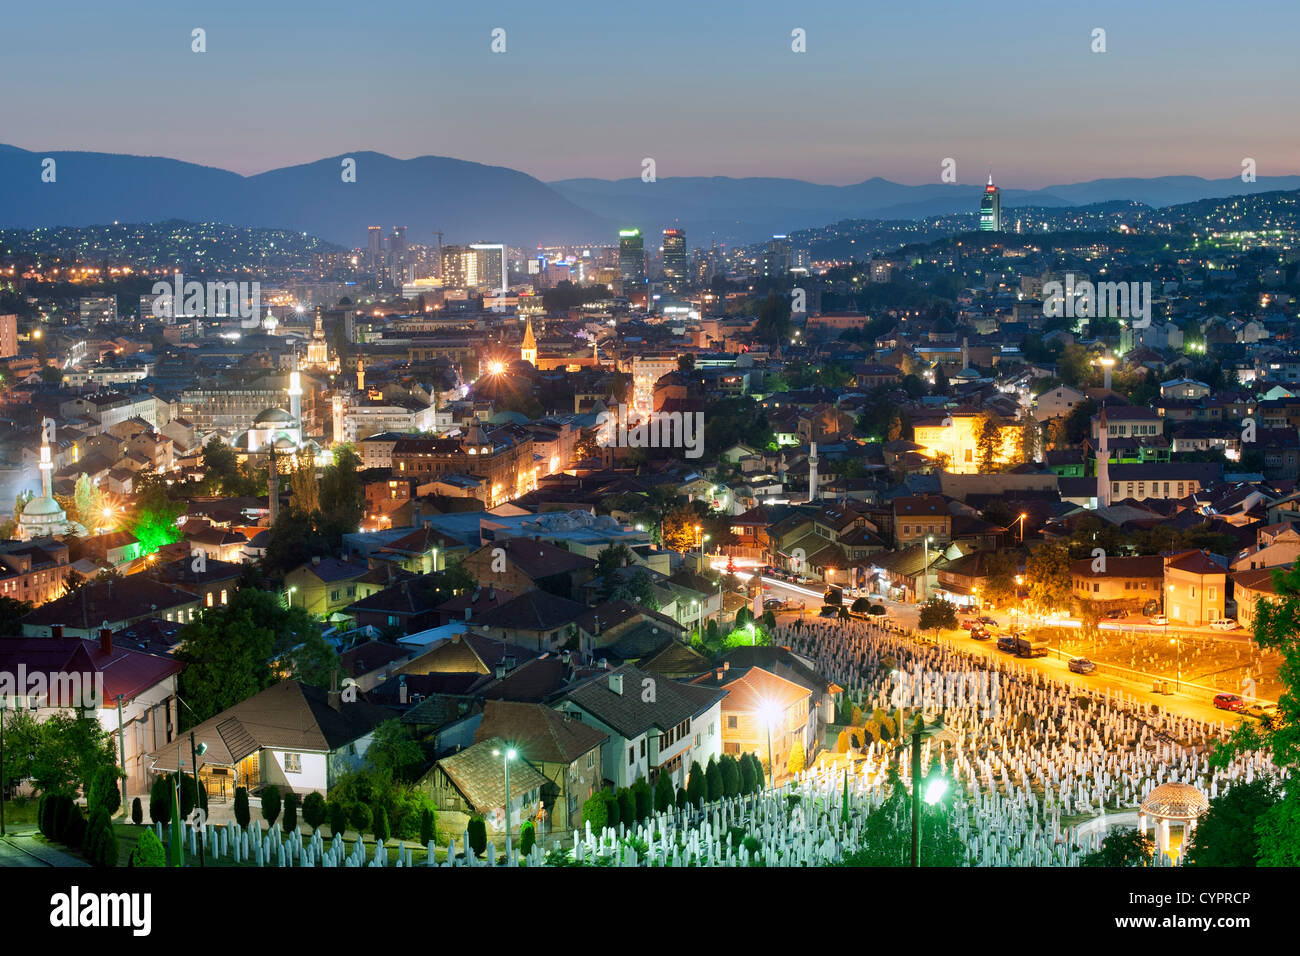 Dusk view of Sarajevo, the capital city of Bosnia and Herzegovina. In the foreground is the Martyrs memorial cemetery Kovaci. Stock Photo